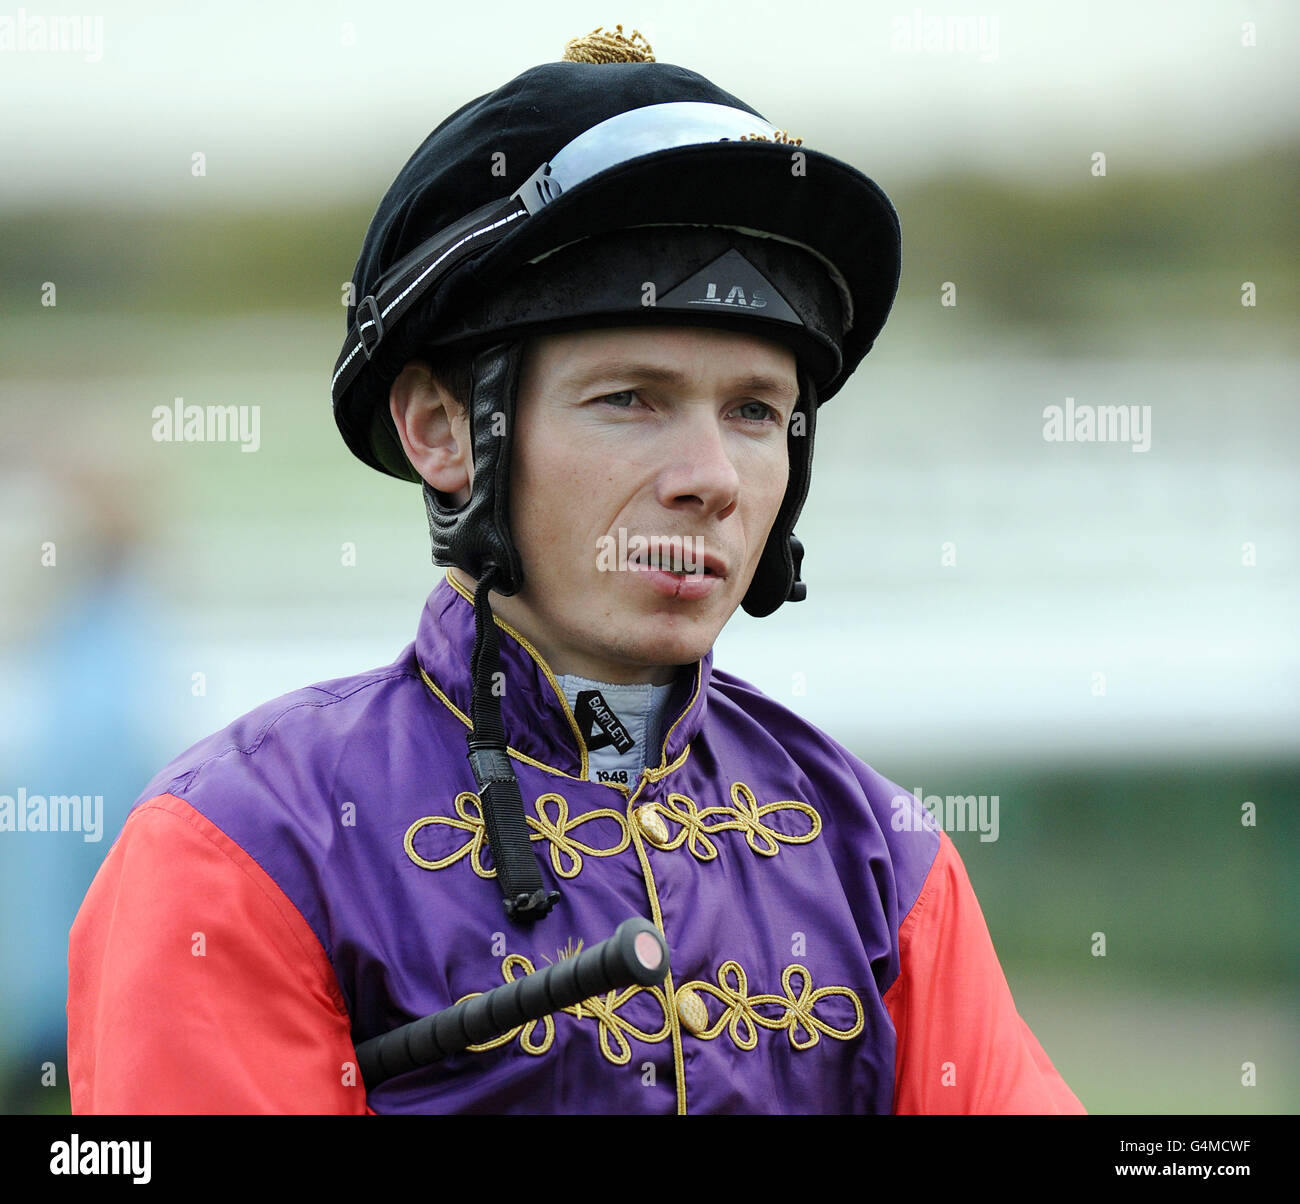 Jockey jamie spencer wears the queens colours at doncaster racecourse ...